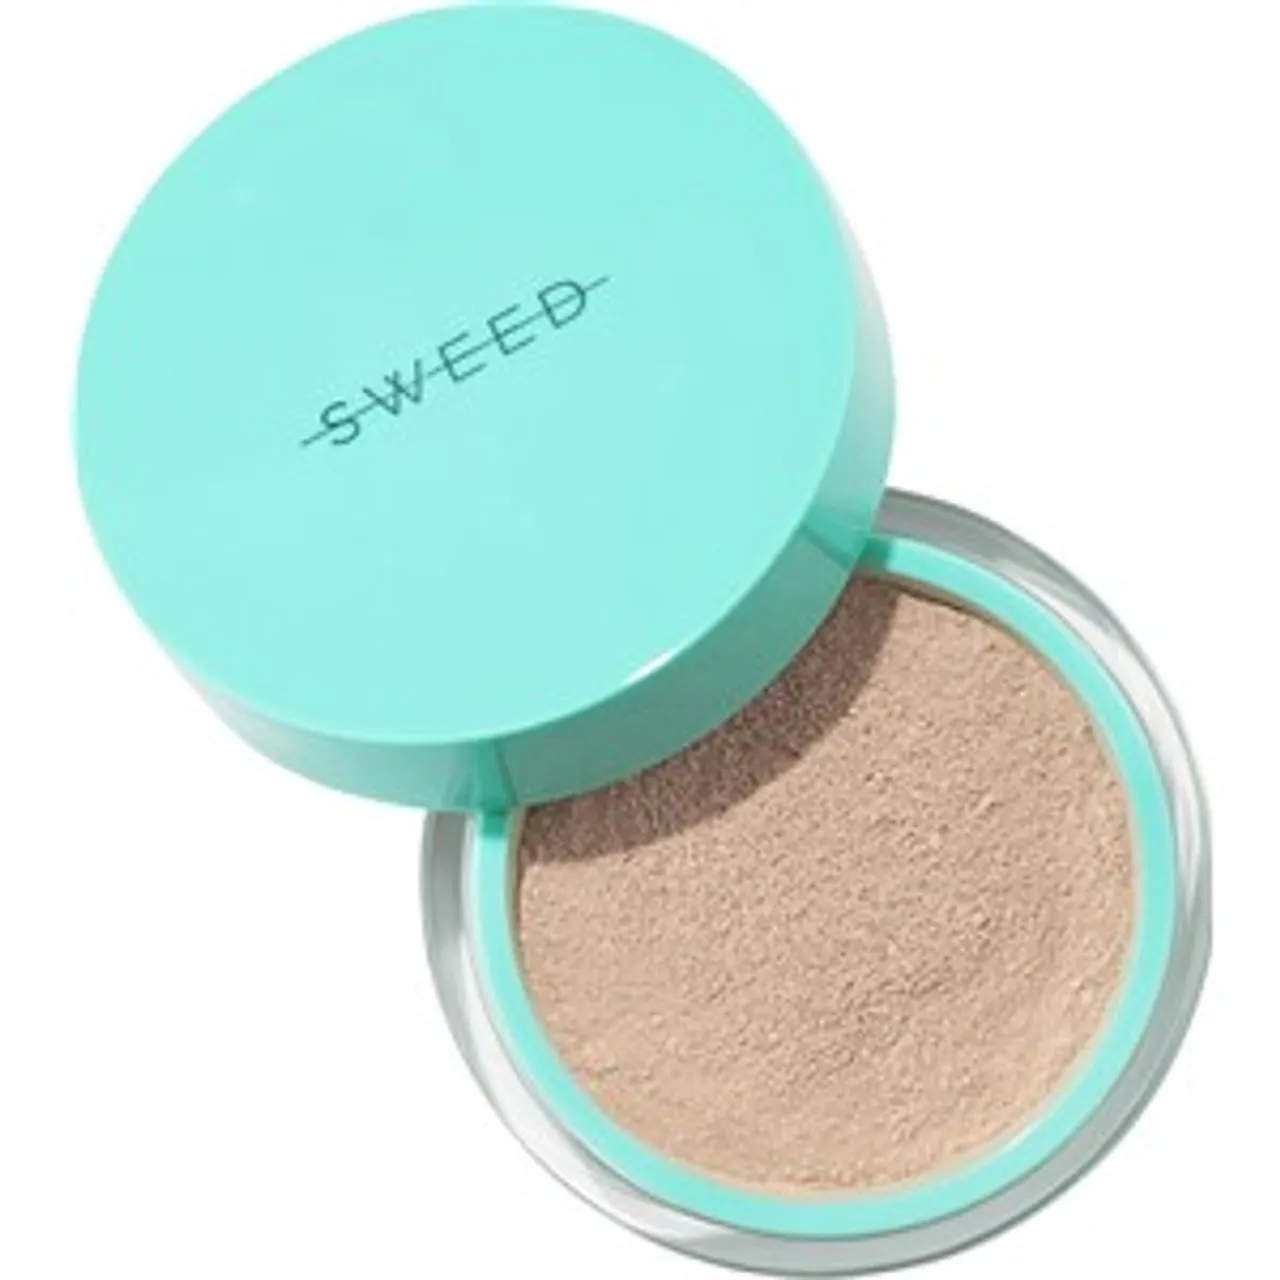 Sweed Teint Miracle Mineral Powder Foundation Contouring Damen